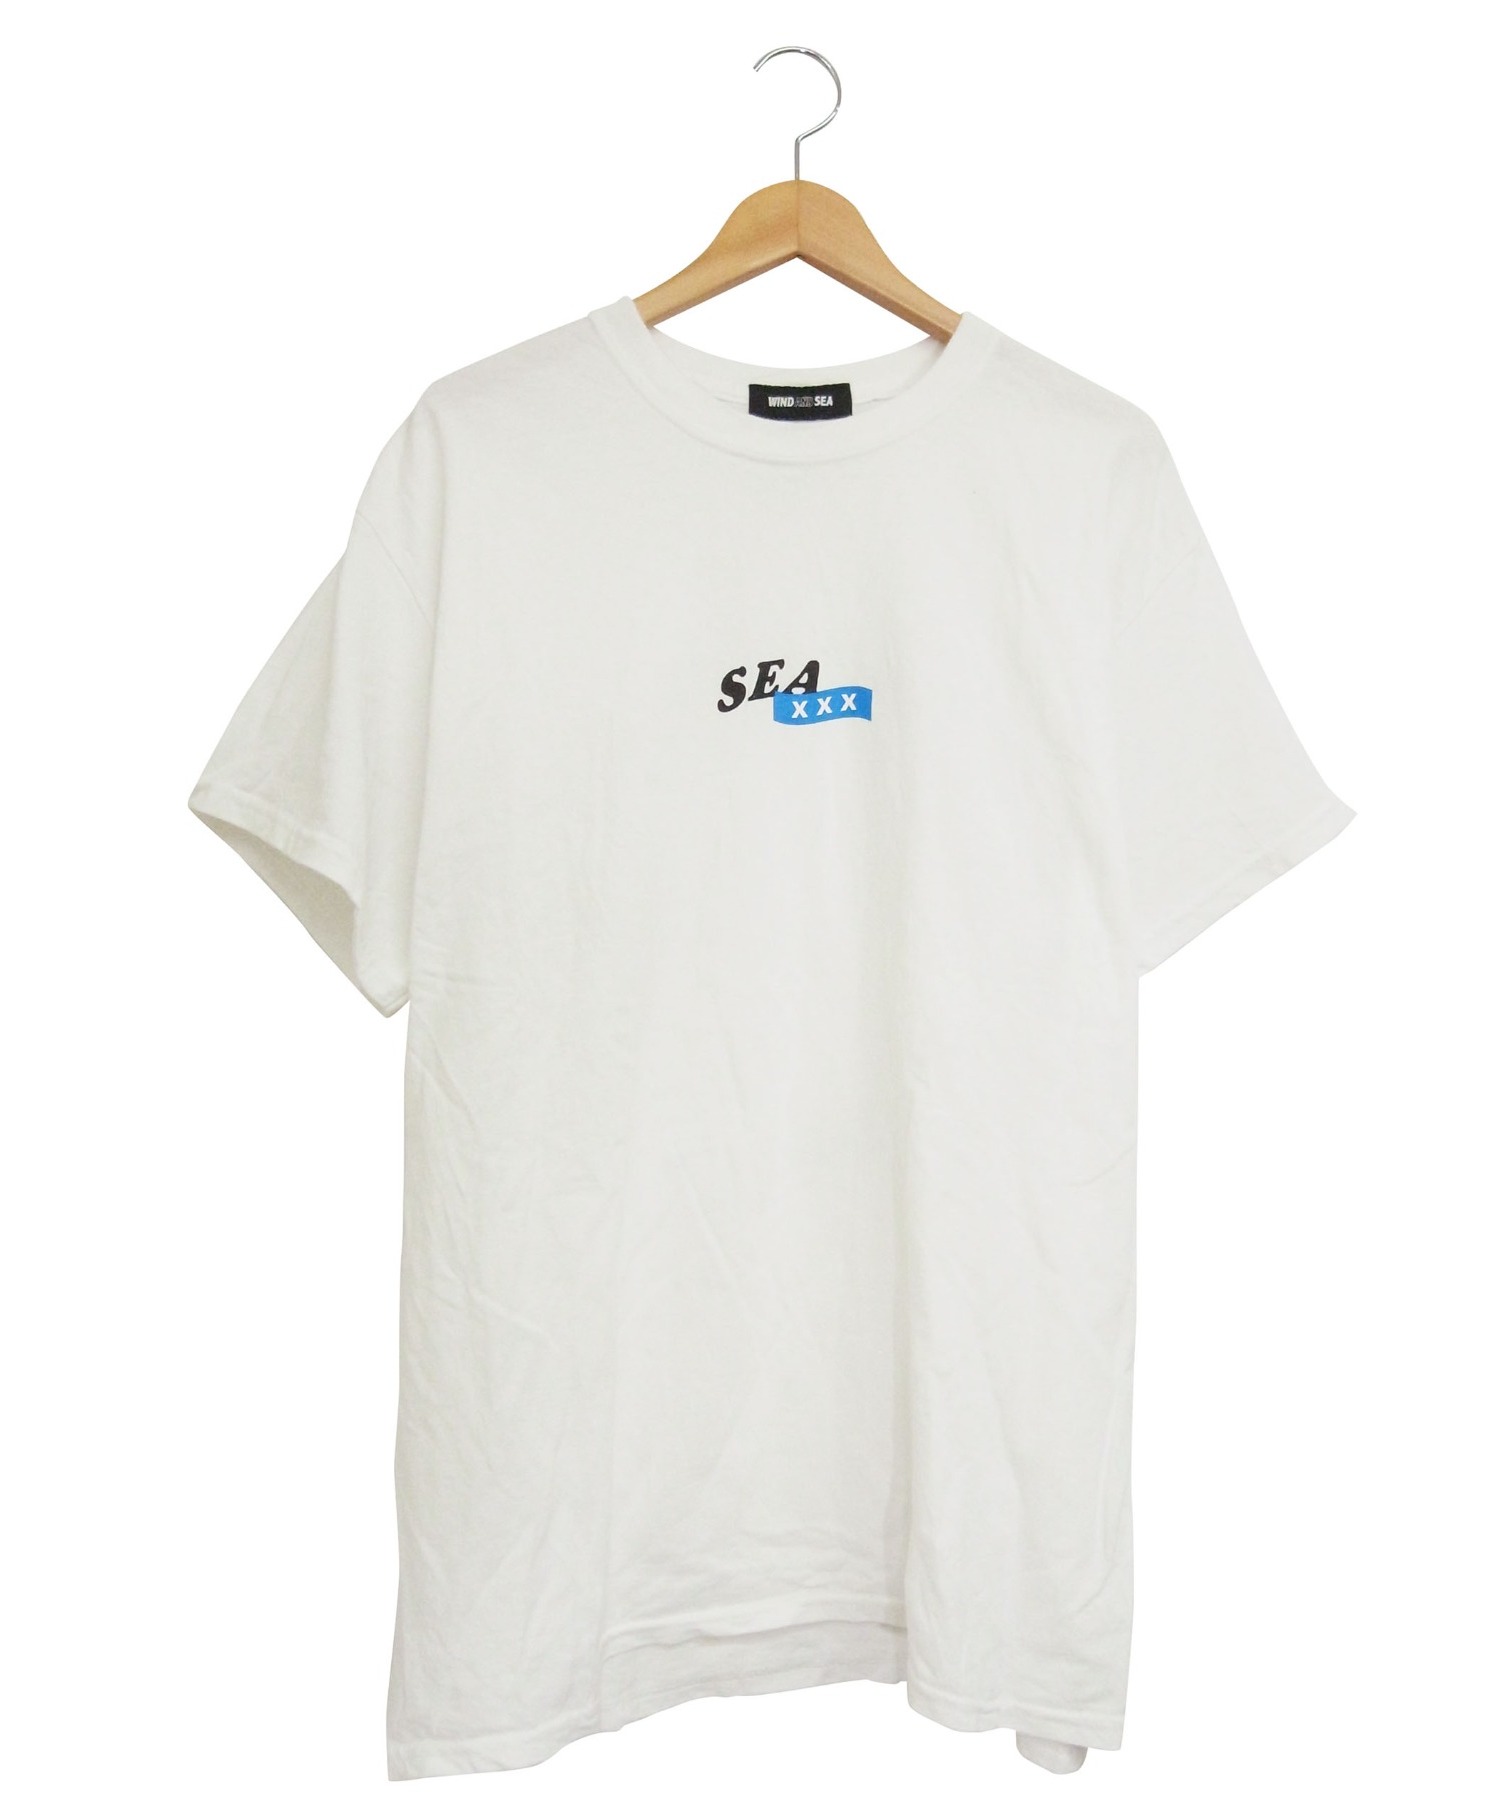 M god selection wind and sea tシャツ | www.jarussi.com.br